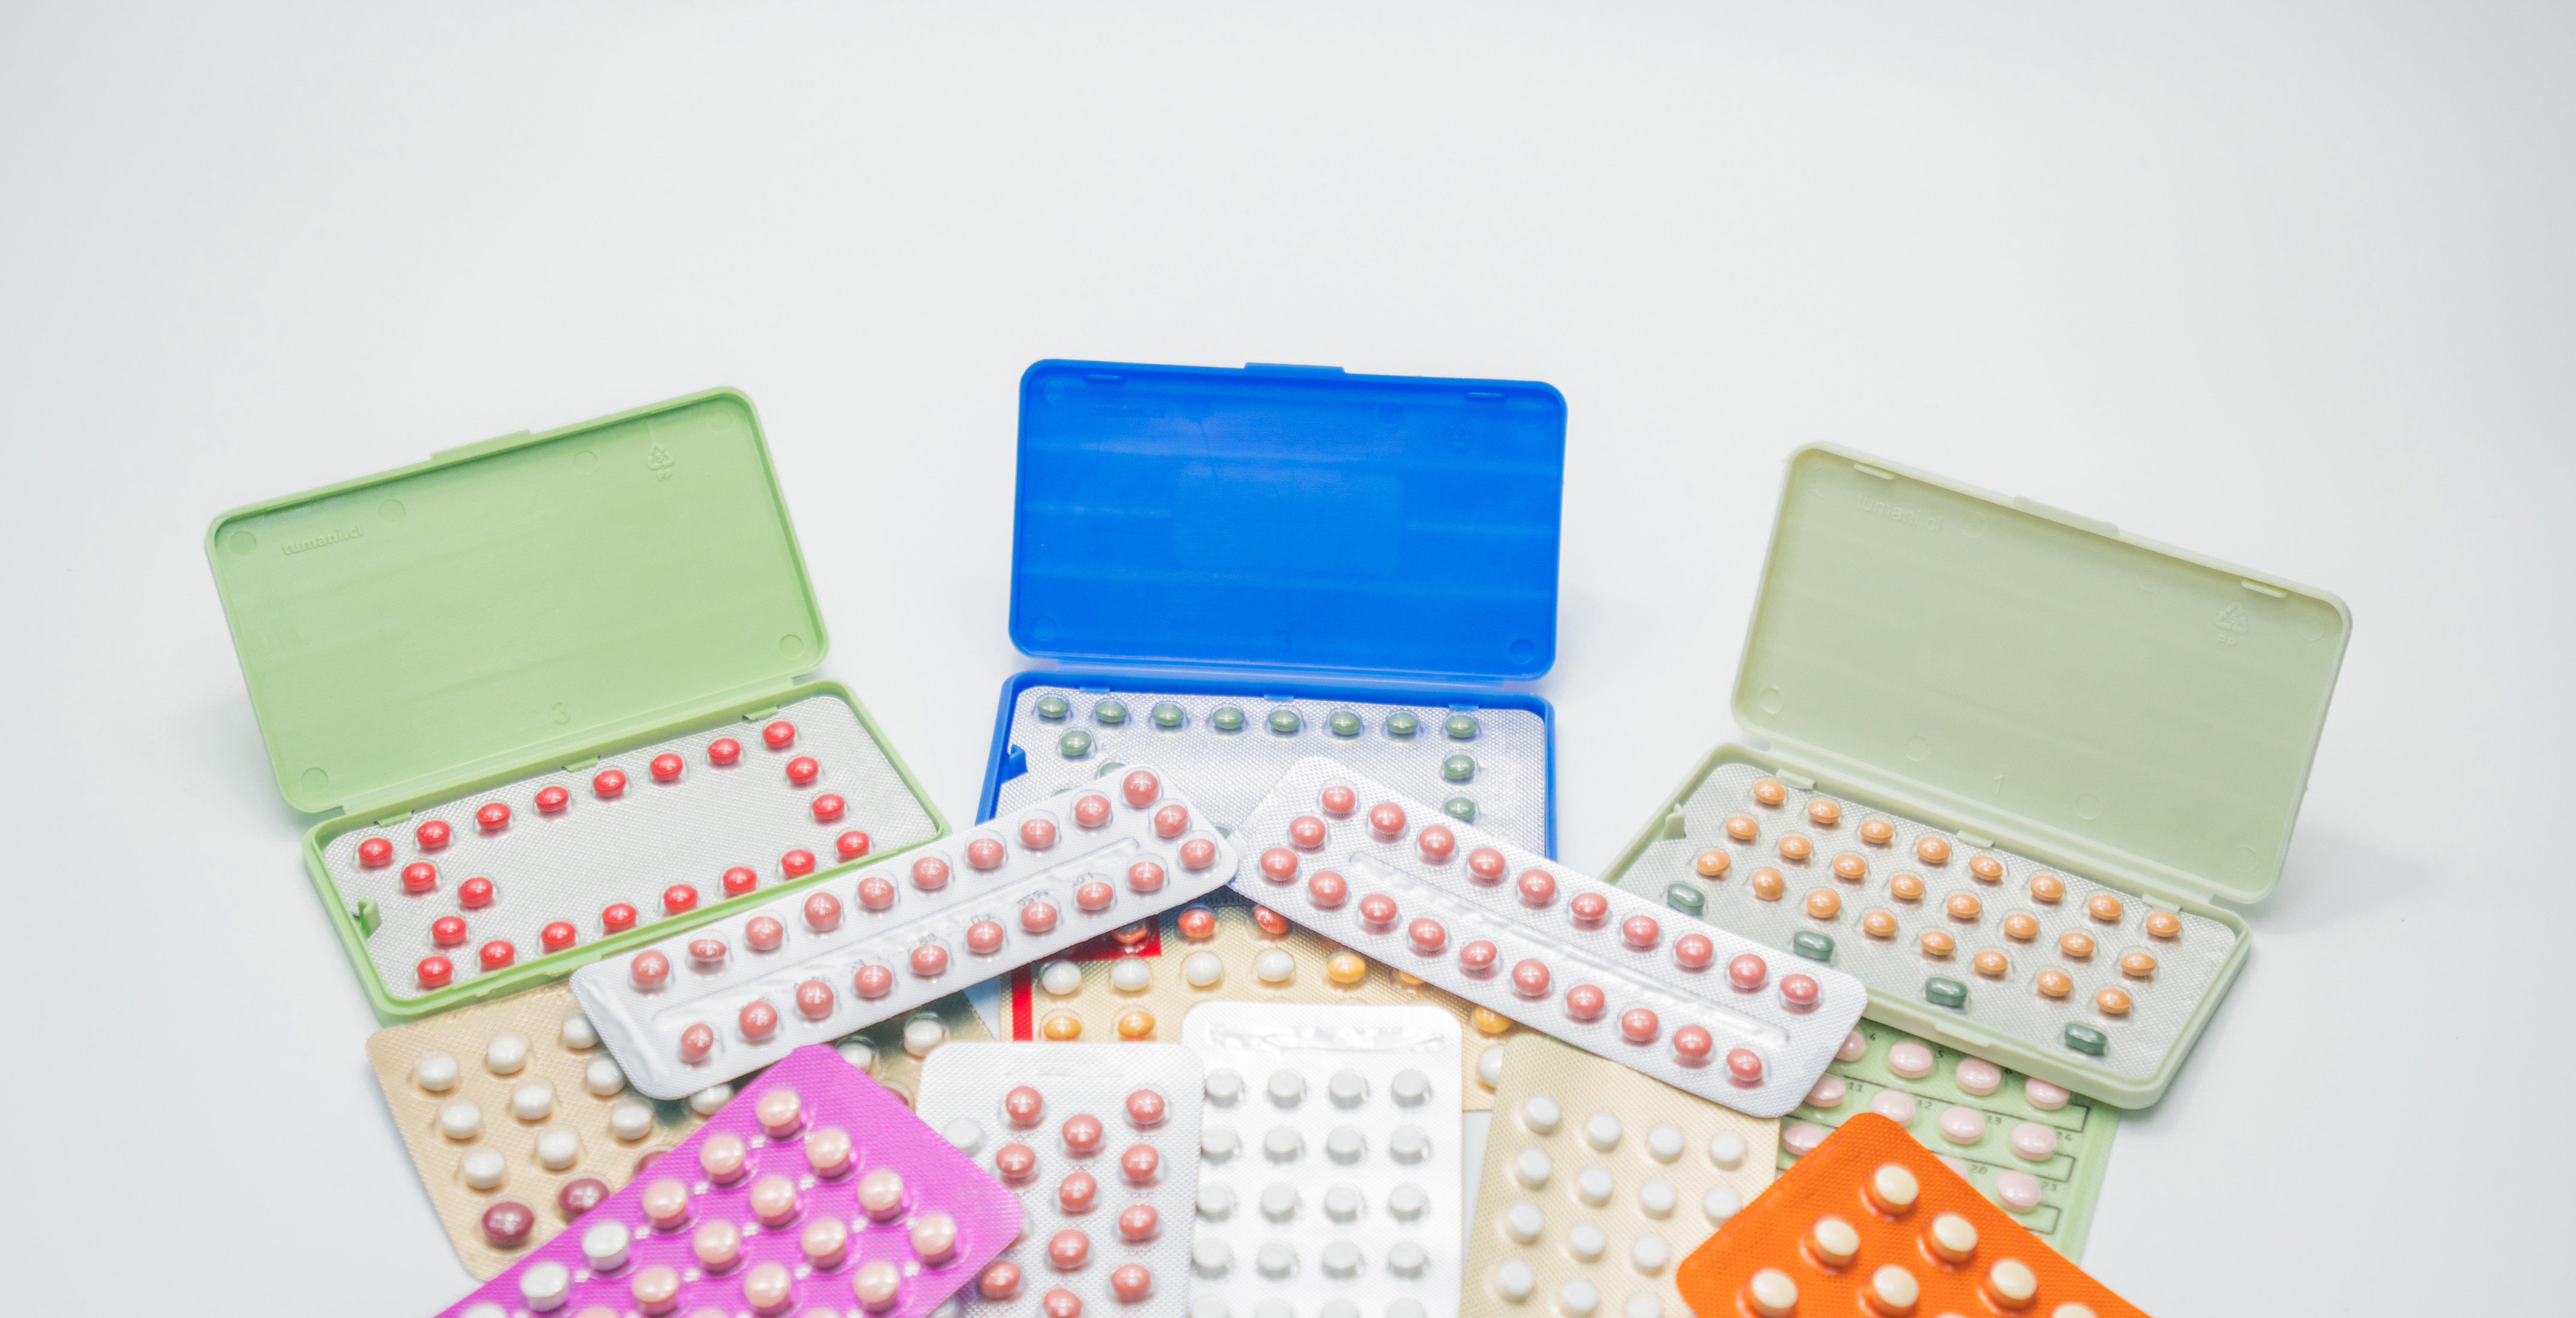 Oral Contraceptives Containing Progestogens Are Linked to Breast Cancer